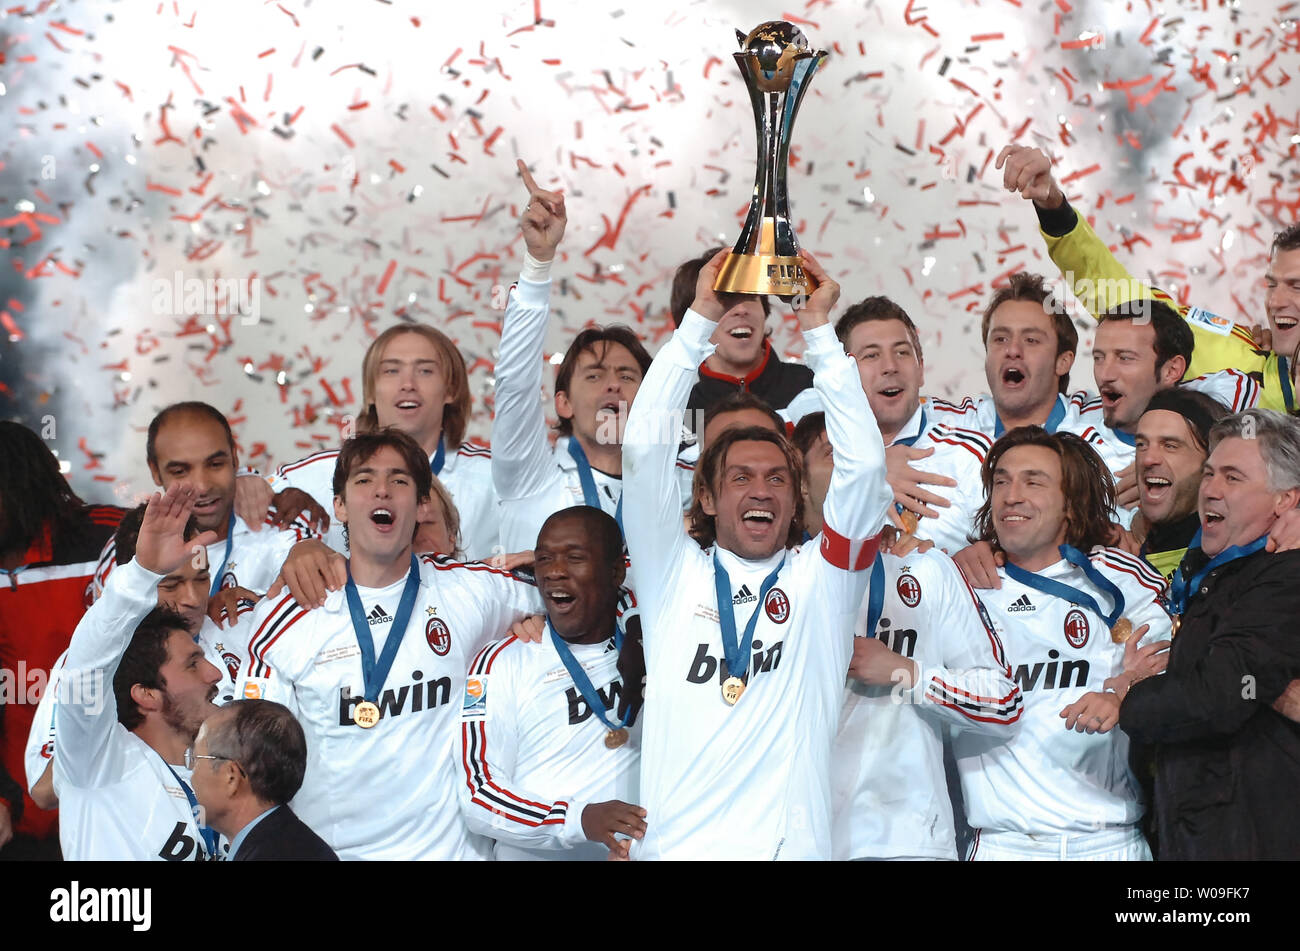 Paolo Maldini (C), of AC Milan, holds the champion trophy after winning the FIFA Club Worldcup 2007 at the Nissan Stadium in Yokohama, Japan, on December 16 2007. AC Milan defeated Boca Juniors 4-2. (UPI Photo/keizo Mori) Stock Photo